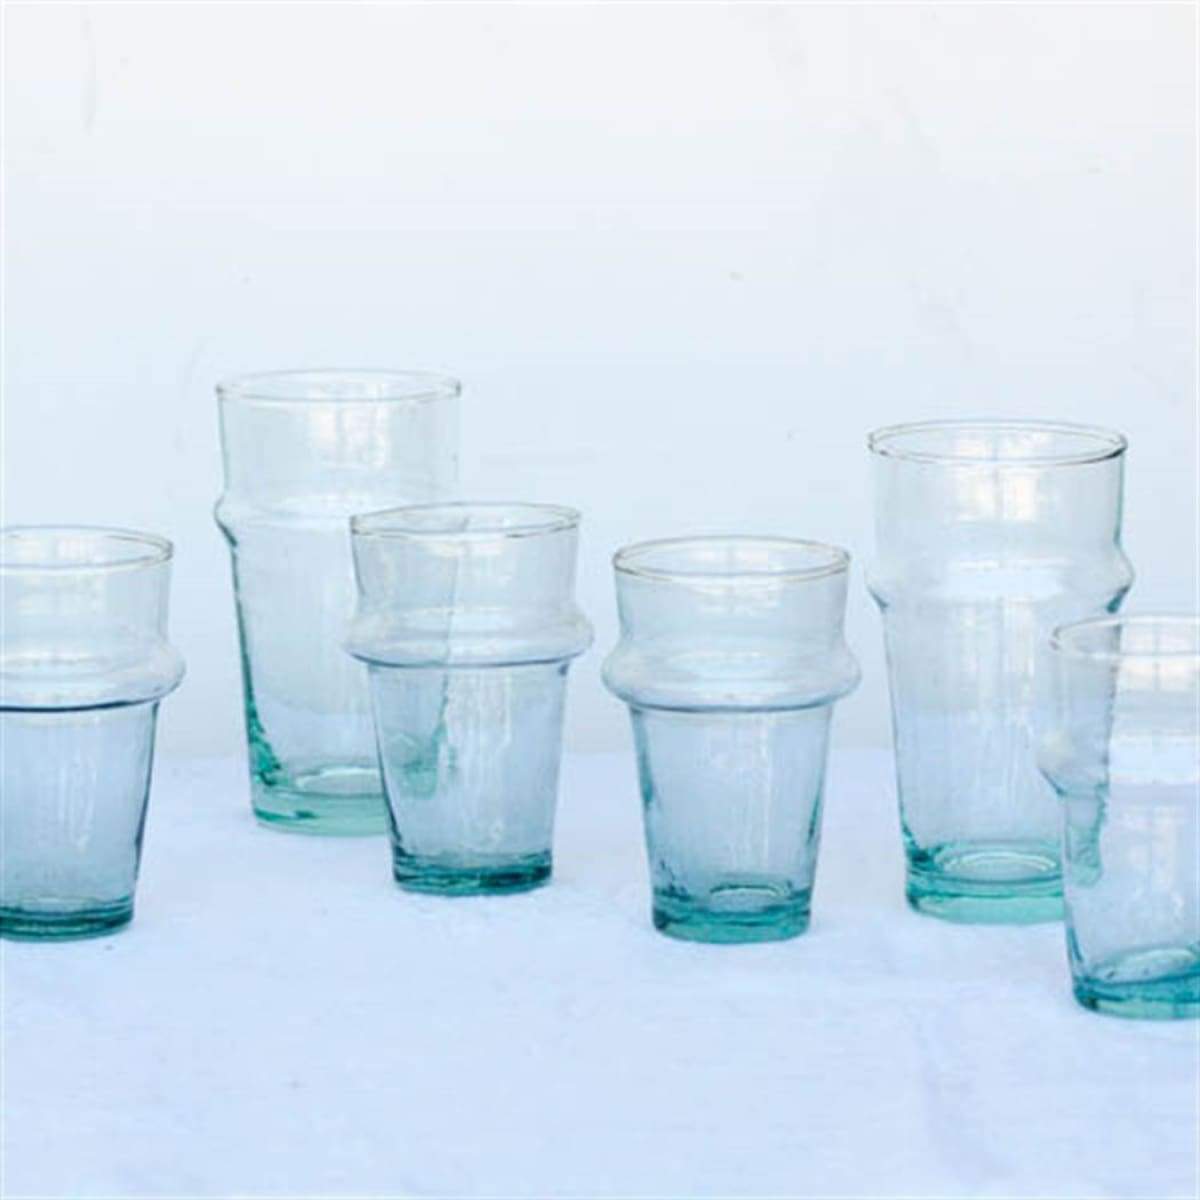 https://elsiegreen.com/cdn/shop/products/moroccan-tea-glass-set-of-6-the-french-kitchen-core-exclude-glasses-green-aqua-highball-turquoise-218.jpg?v=1622417674